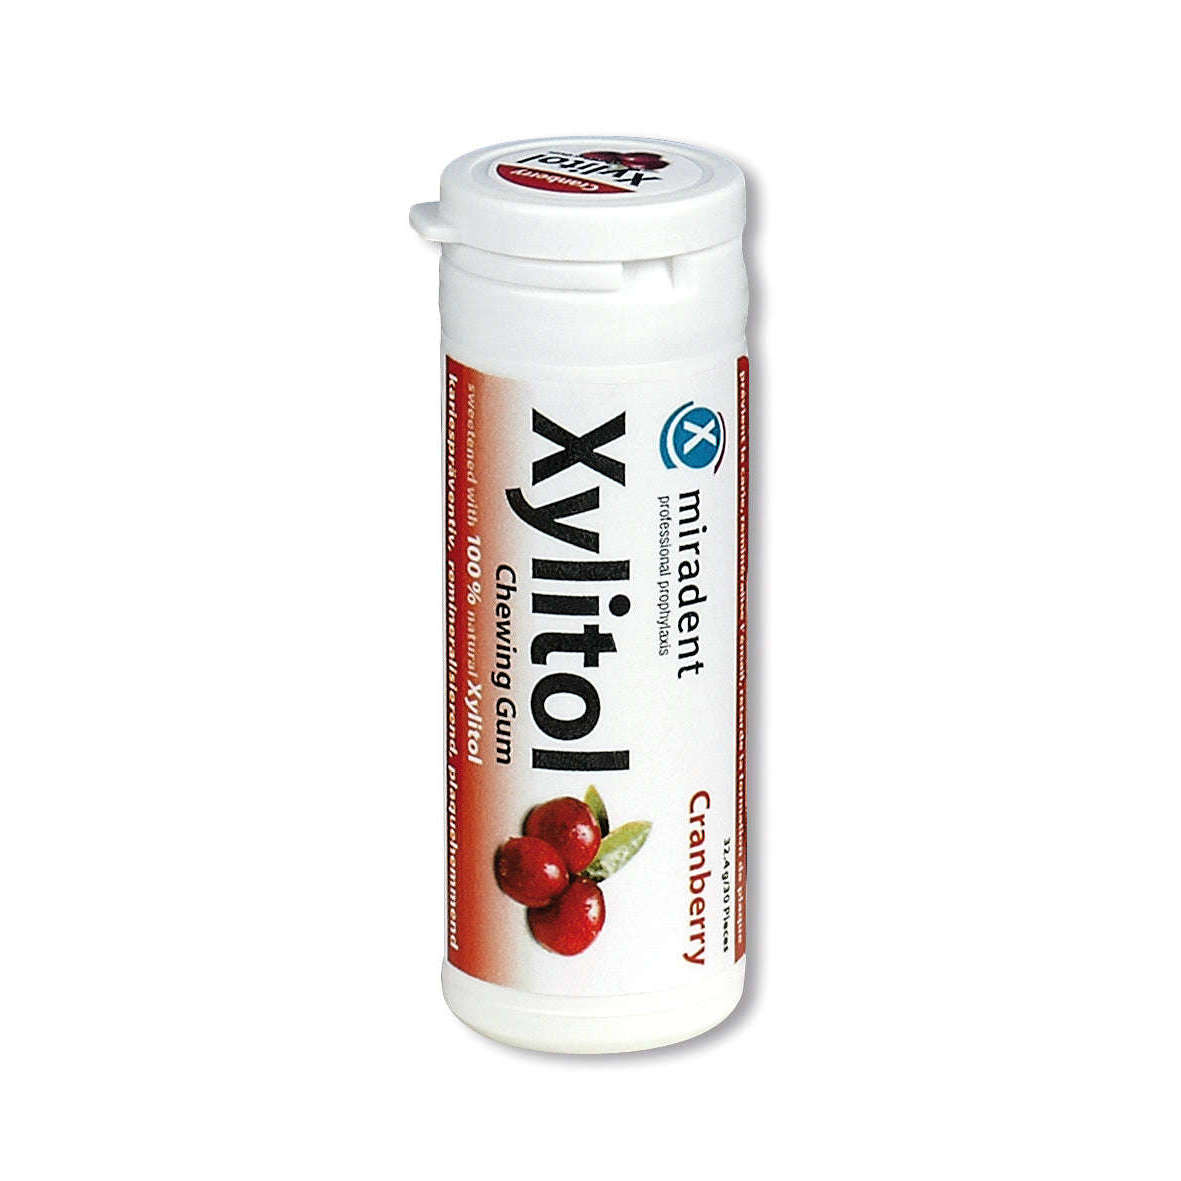 Xylitol Dental Chewing Gum 30gm